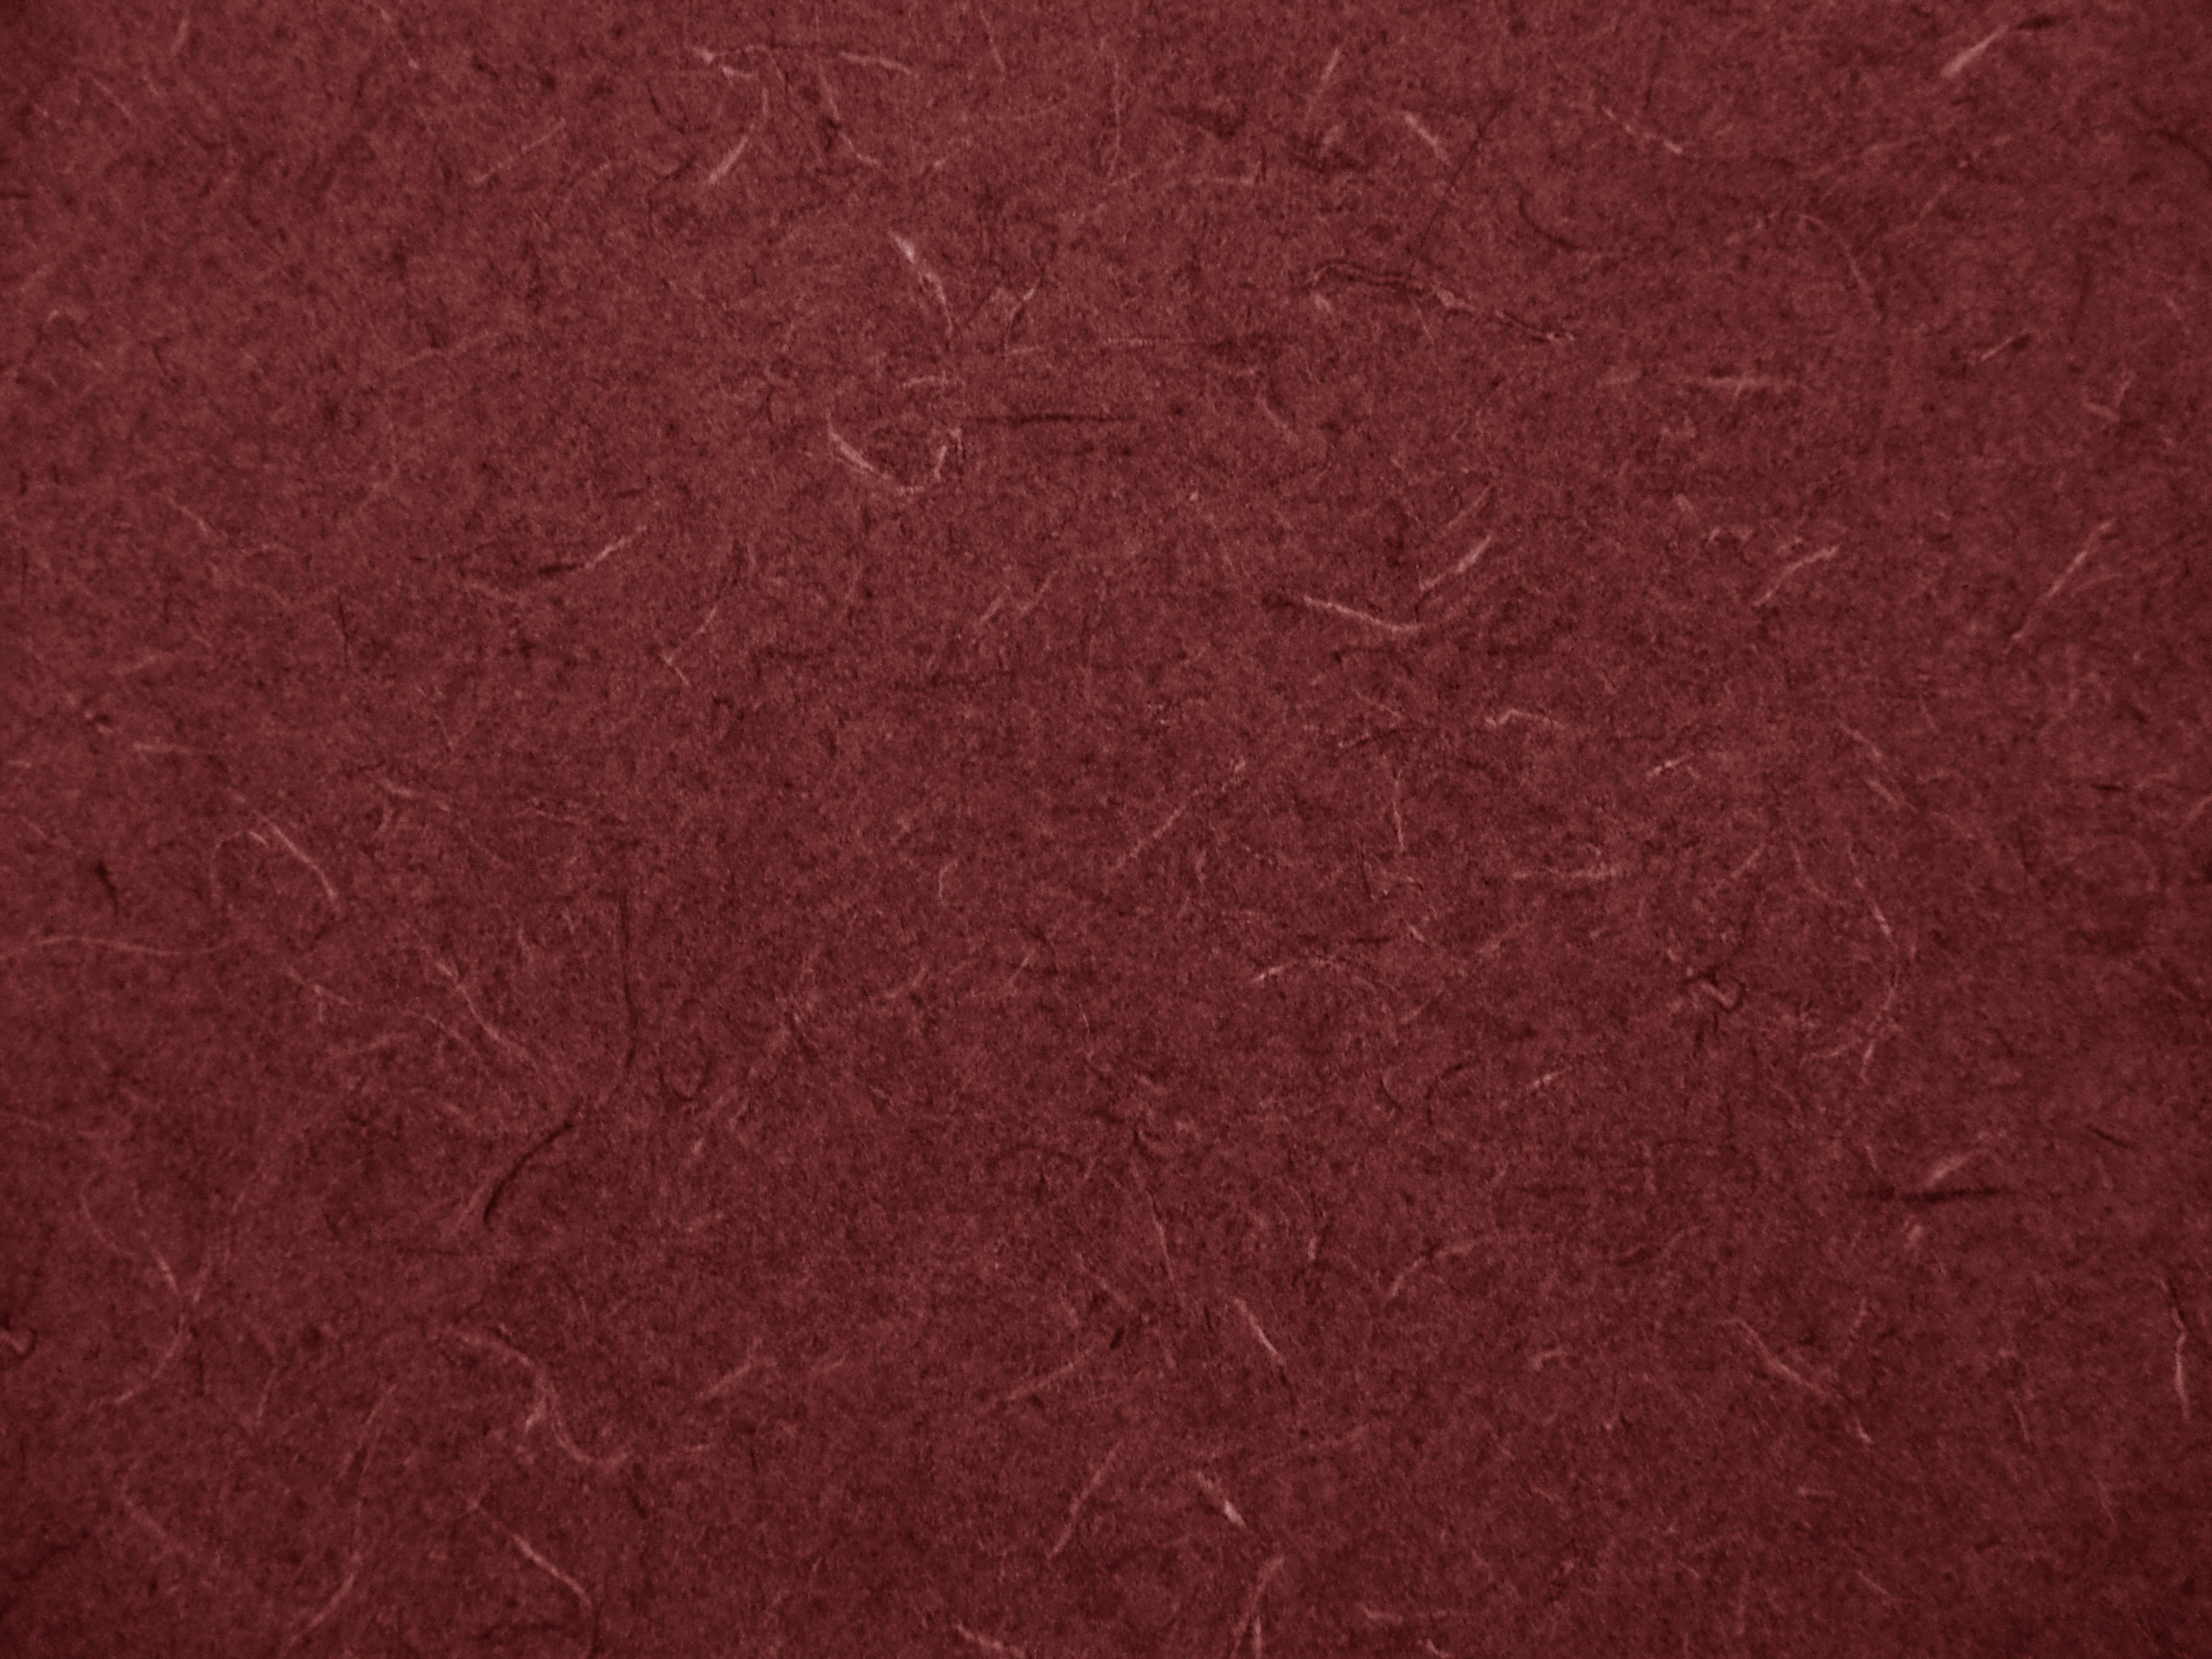 Maroon Abstract Pattern Laminate Countertop Texture Picture